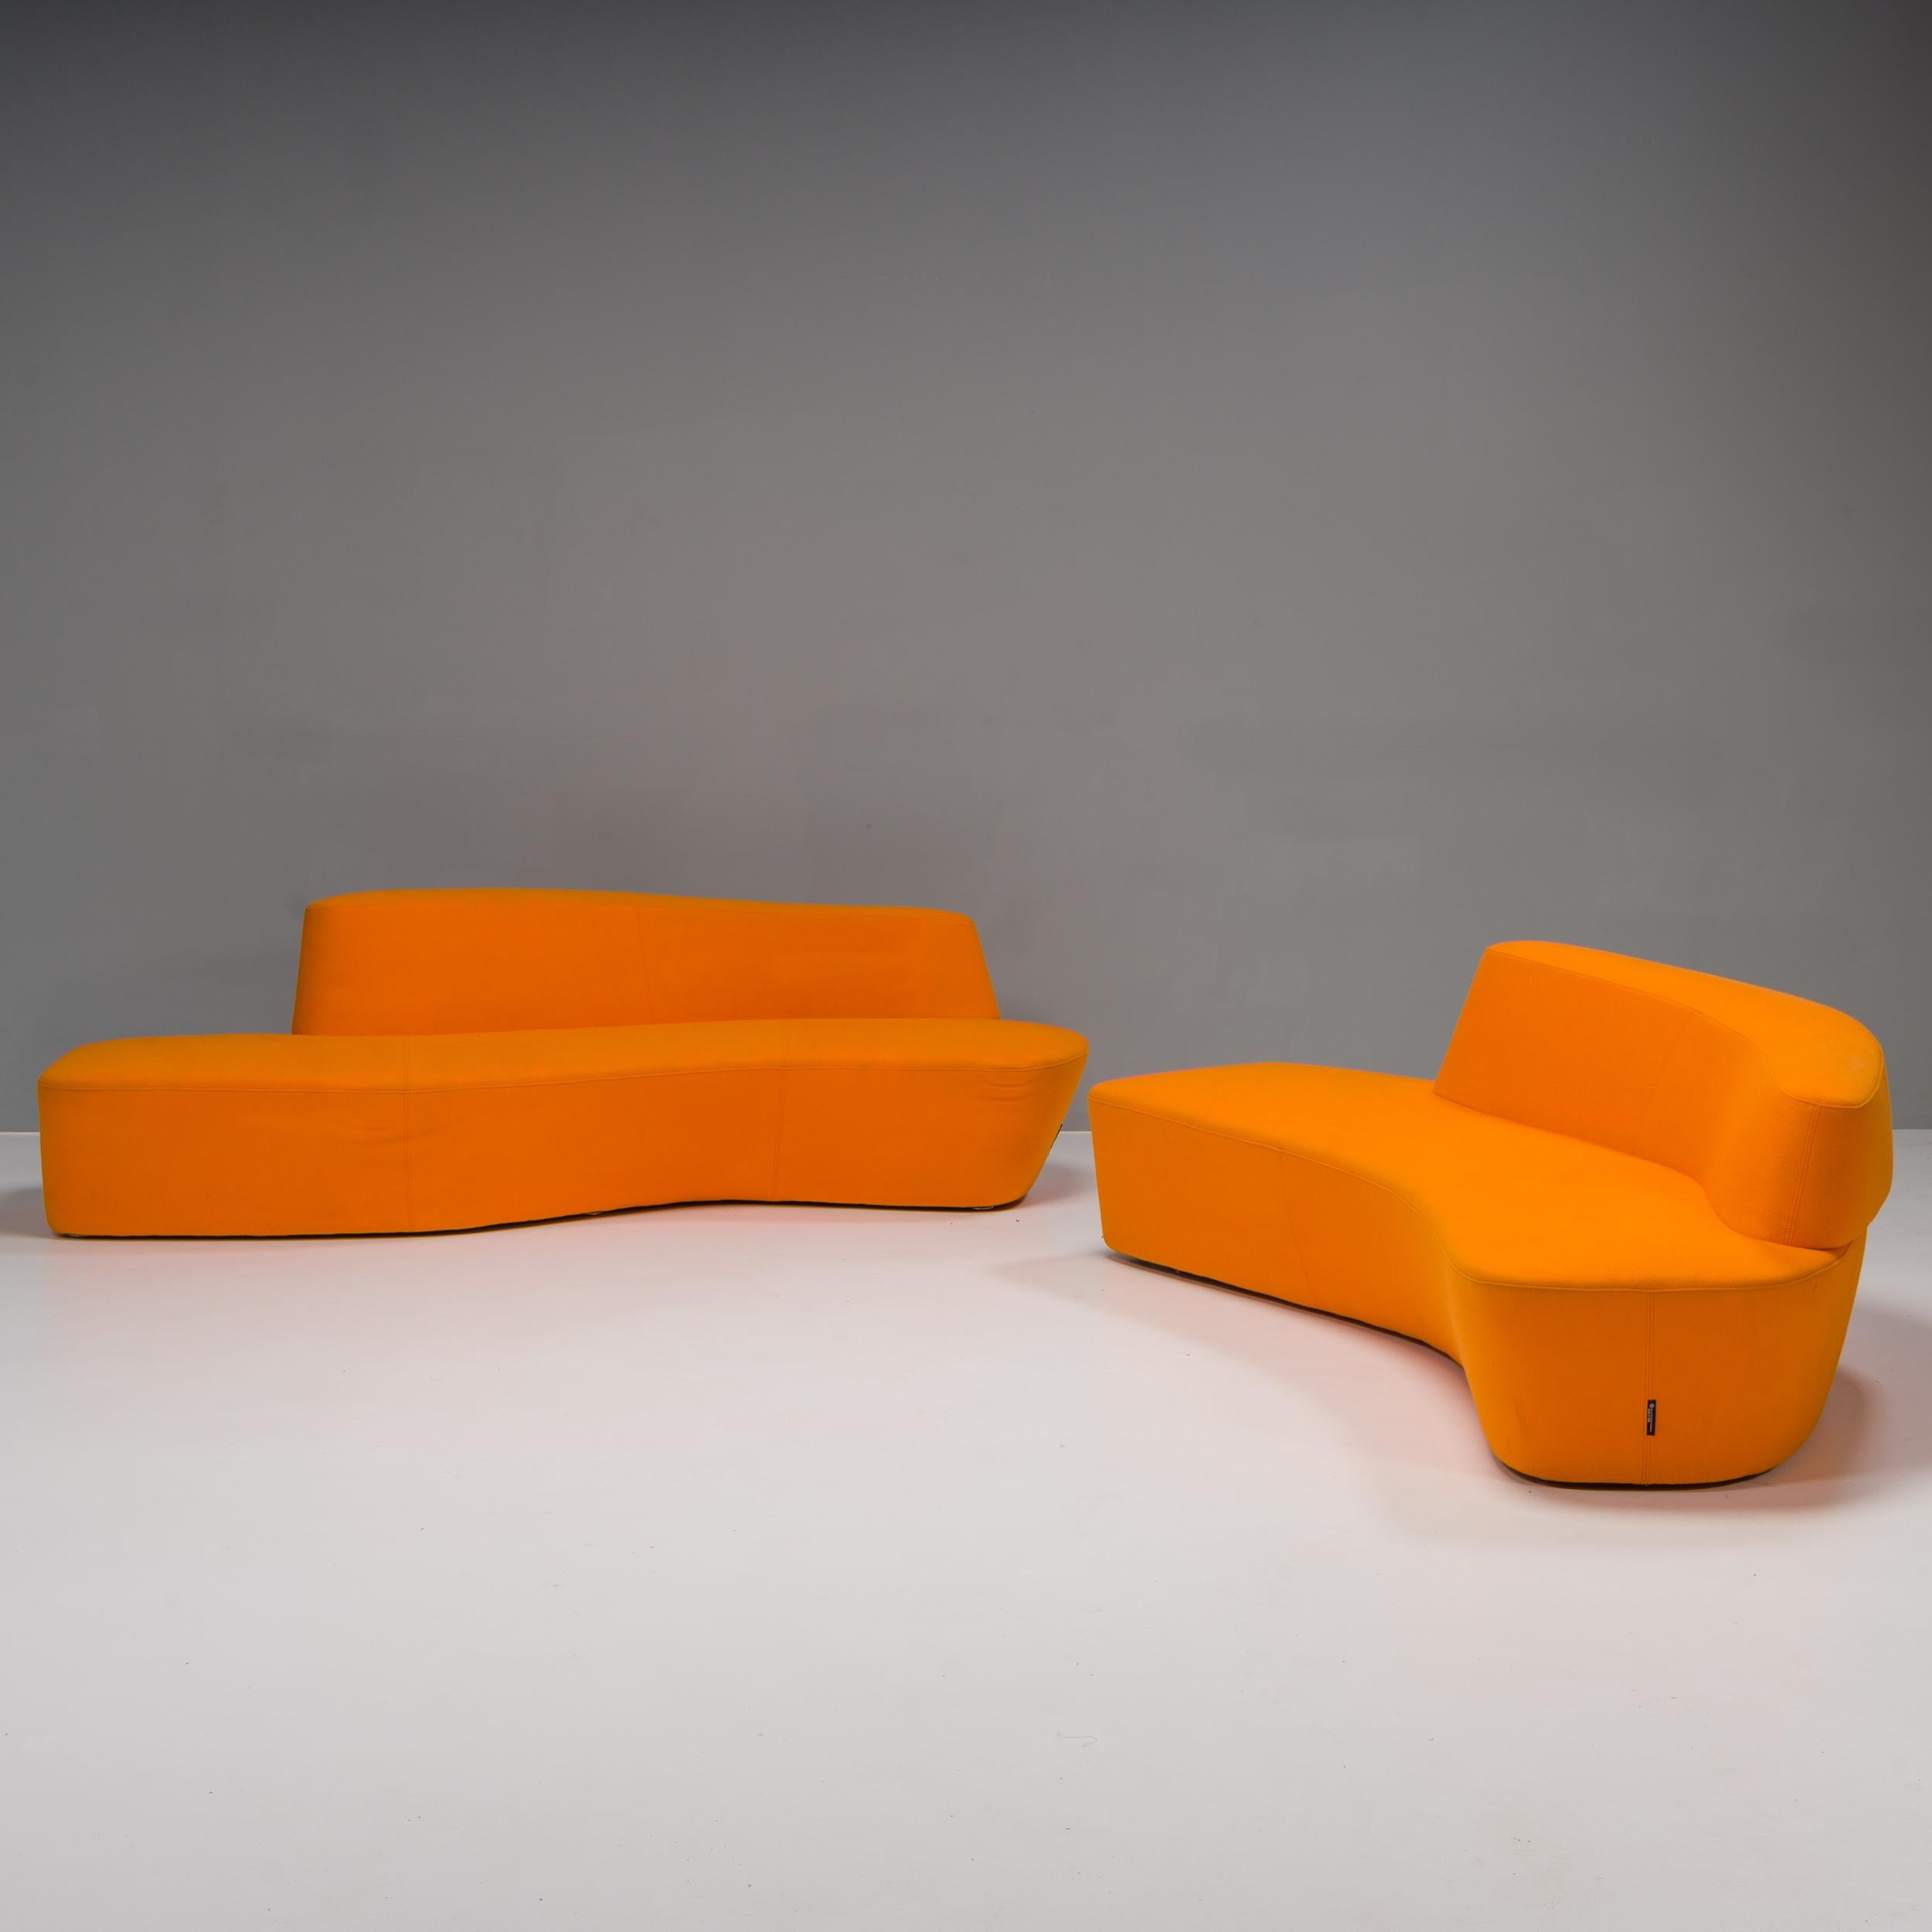 Designed by Pearson Lloyd for Tacchini, the Polar seating collection was inspired by the icebergs of the Arctic.

This set comprises two sofas, one larger and one smaller, both upholstered in vibrant orange fabric, which can be combined to create